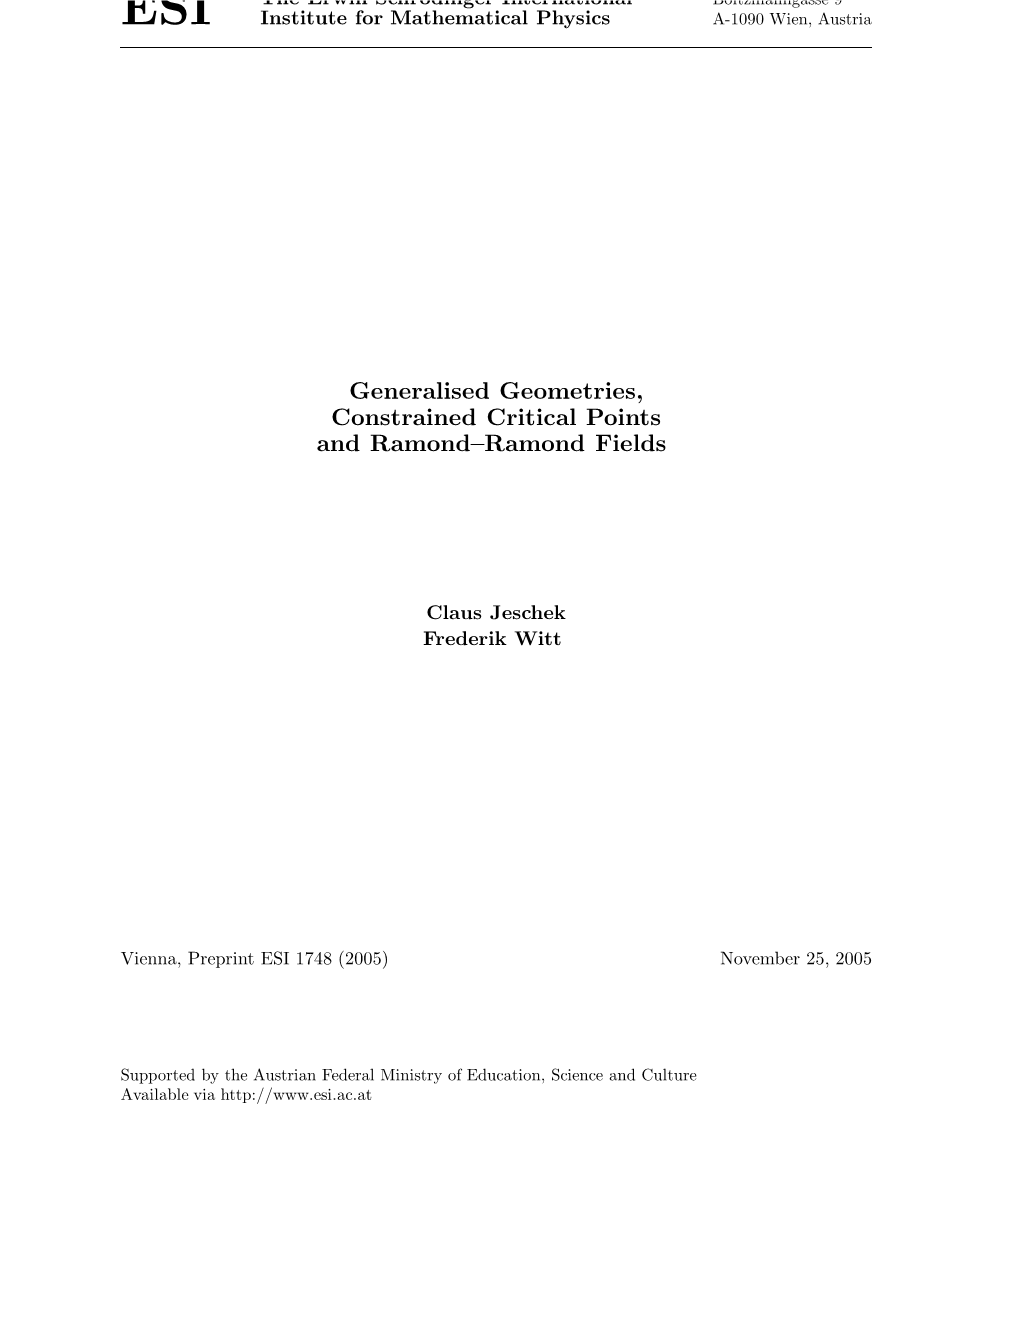 Generalised Geometries, Constrained Critical Points and Ramond–Ramond Fields